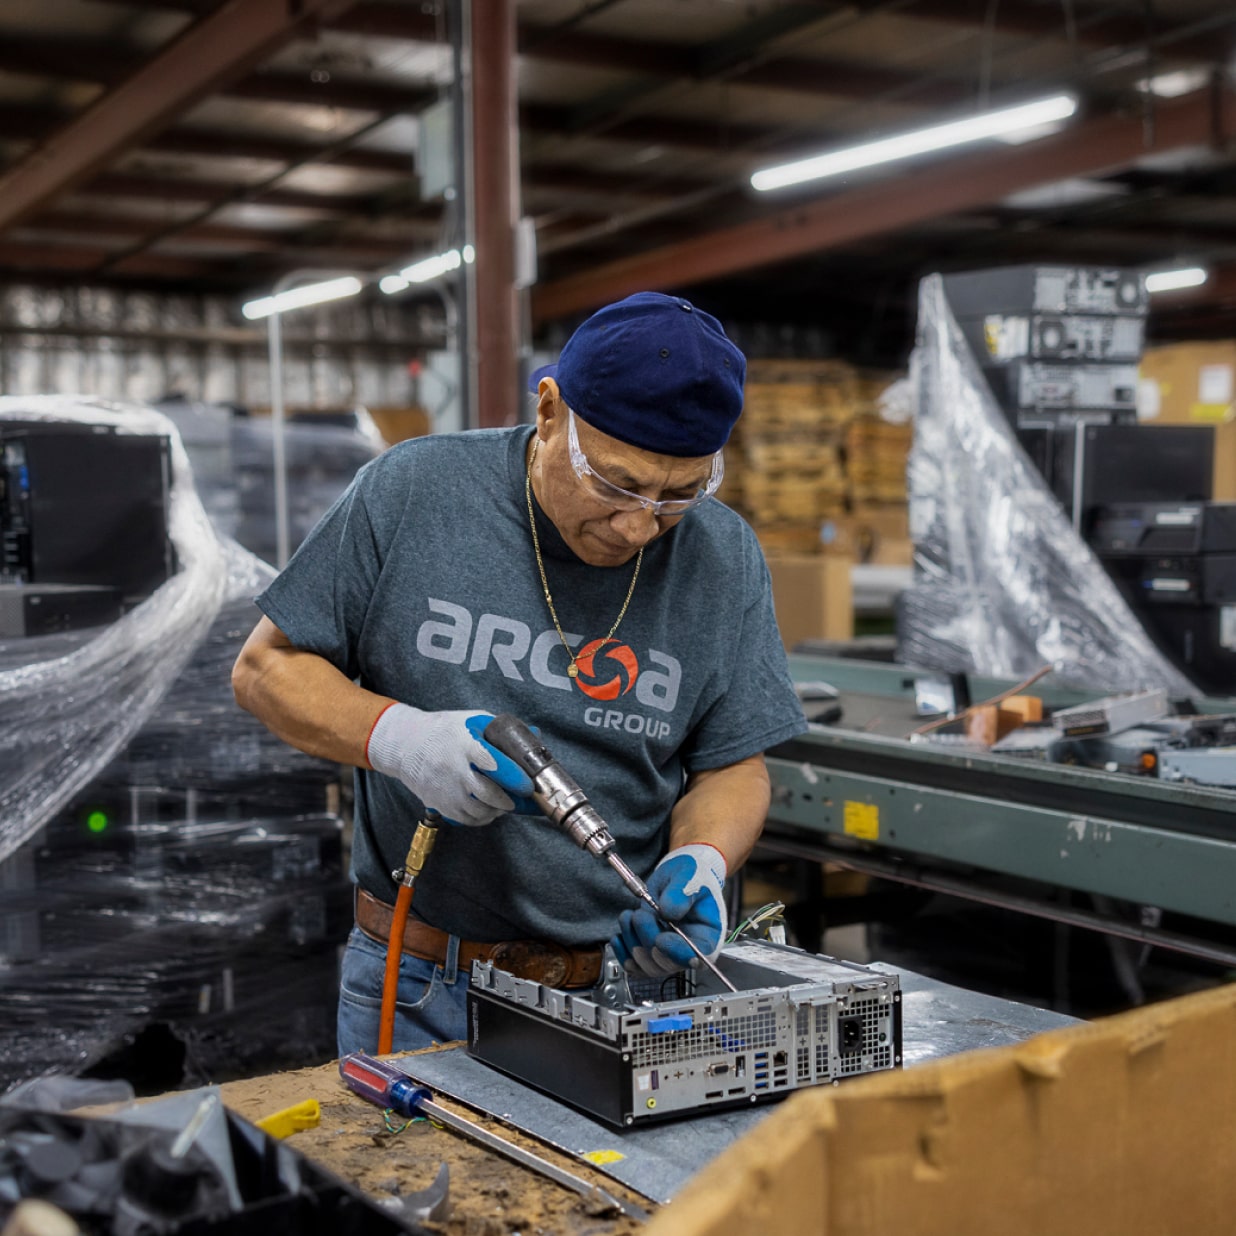 ARCOA employee working on a computer in a warehouse